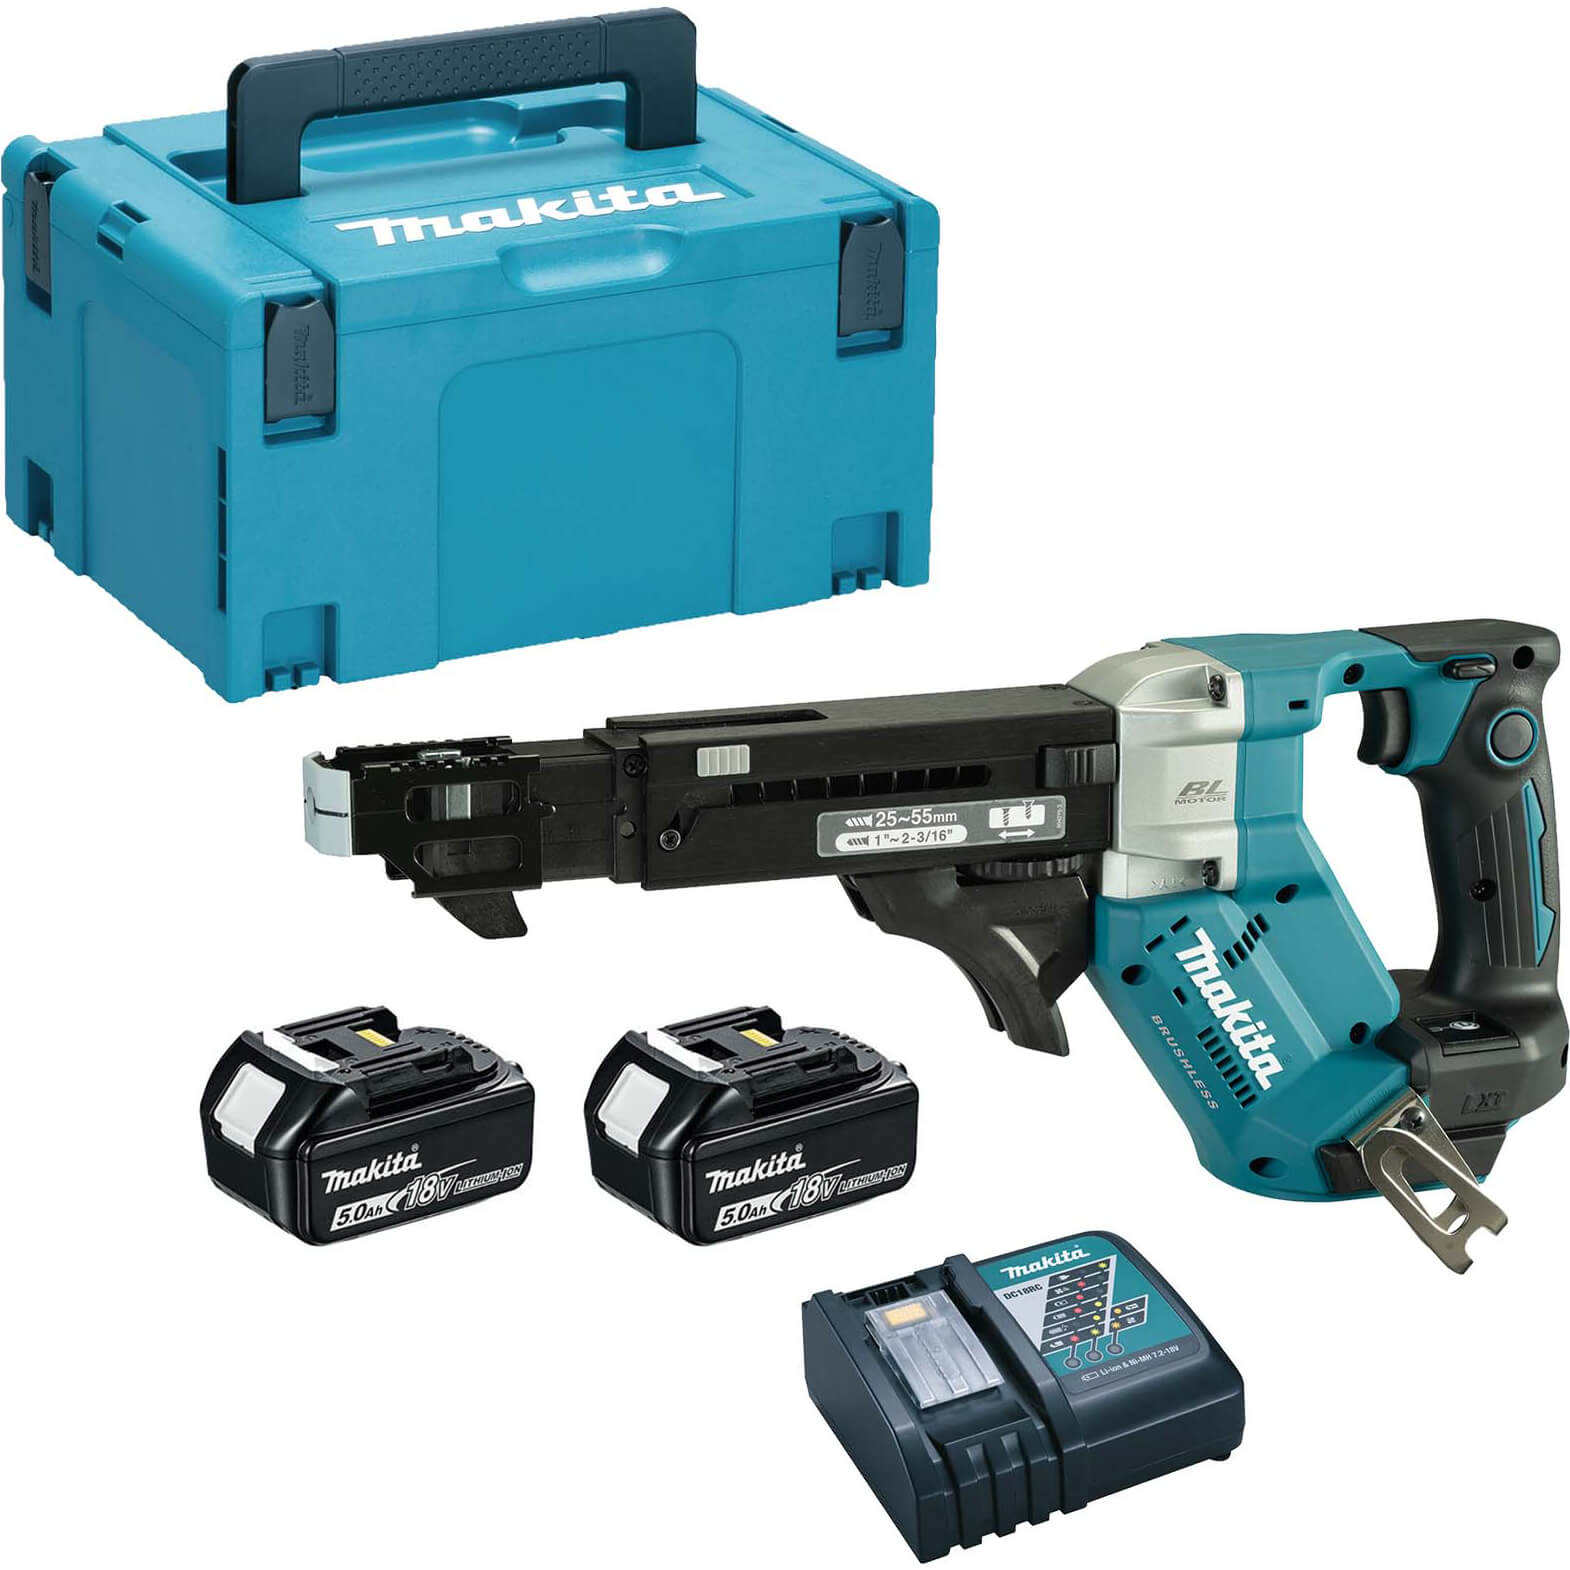 Image of Makita DFR551 18v LXT Cordless Brushless Auto Feed Screwdriver 2 x 5ah Li-ion Charger Case